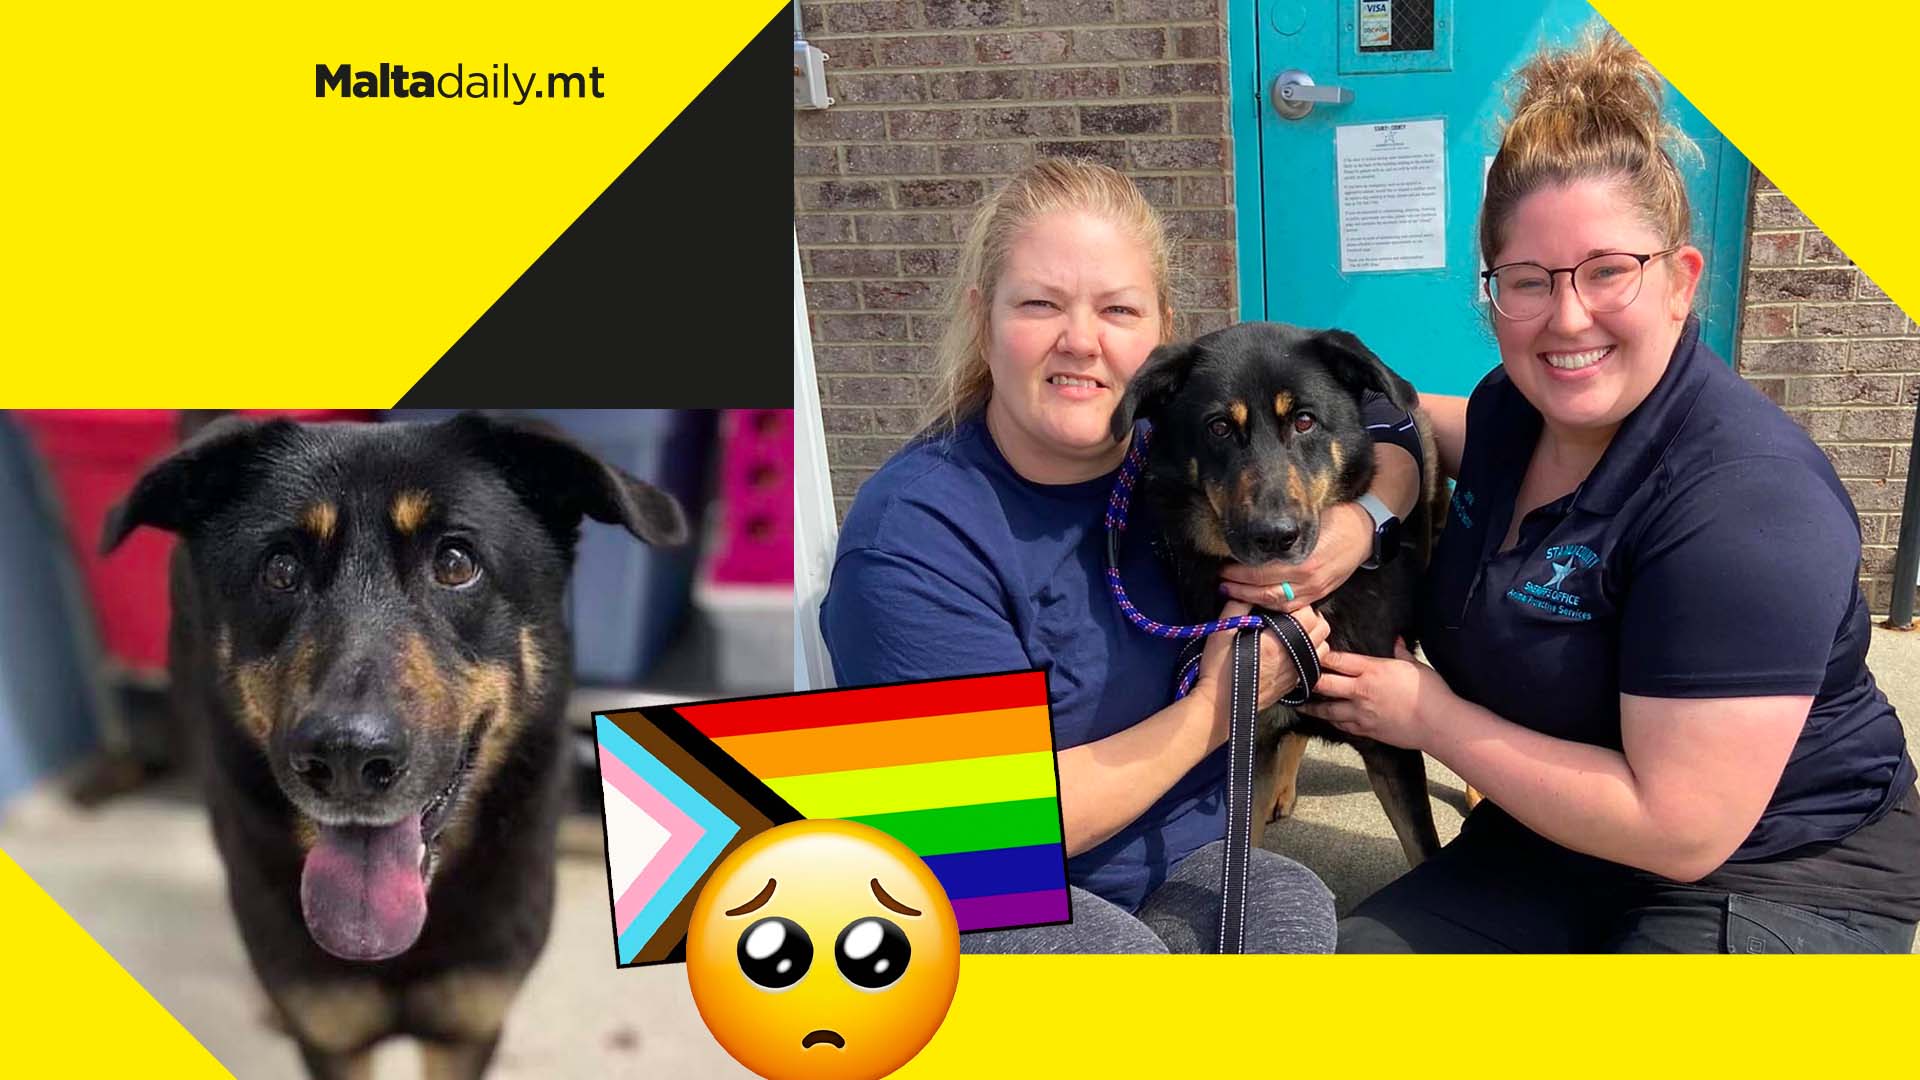 Dog abandoned because owner thought he was gay adopted by gay couple